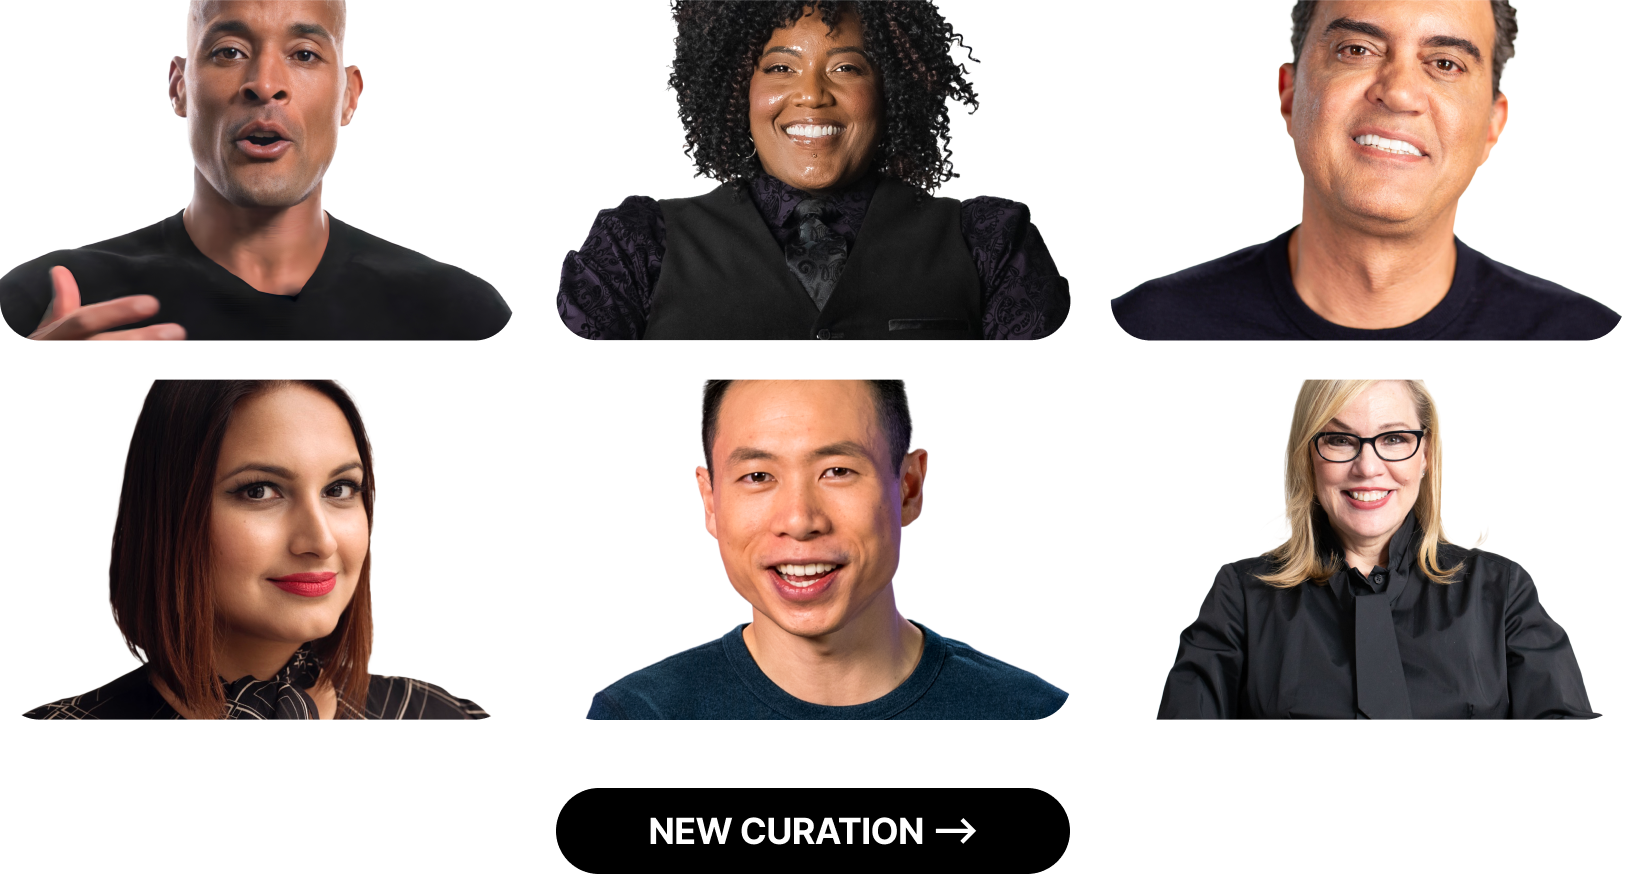 Six diverse people smiling and posing, three men and three women, each in different attire, against a white background, with text "NEW CURATION" at the bottom.